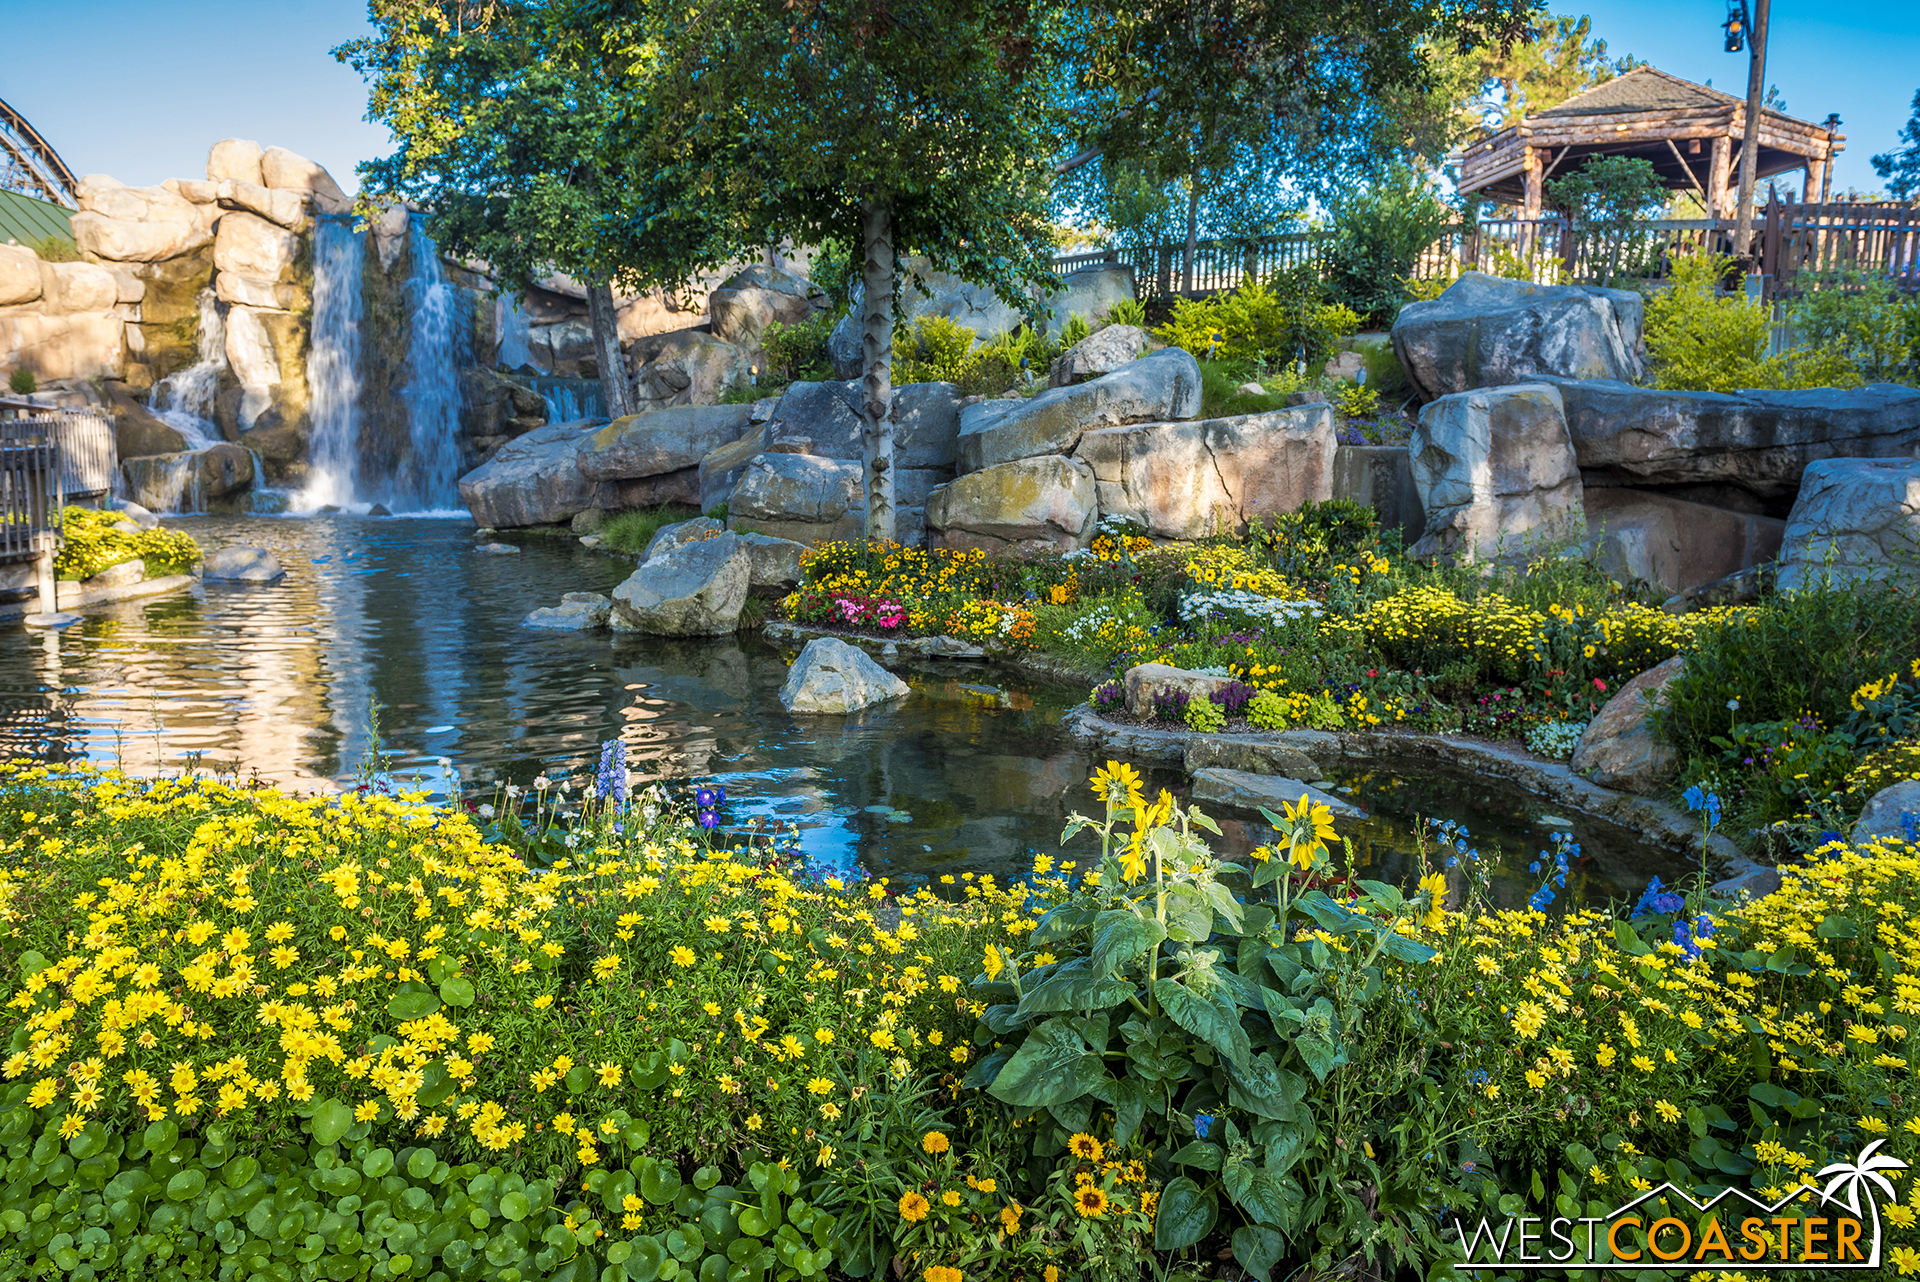  After making it through, guests can come out to a lovely floral scene adjacent to Mystery Lodge. 